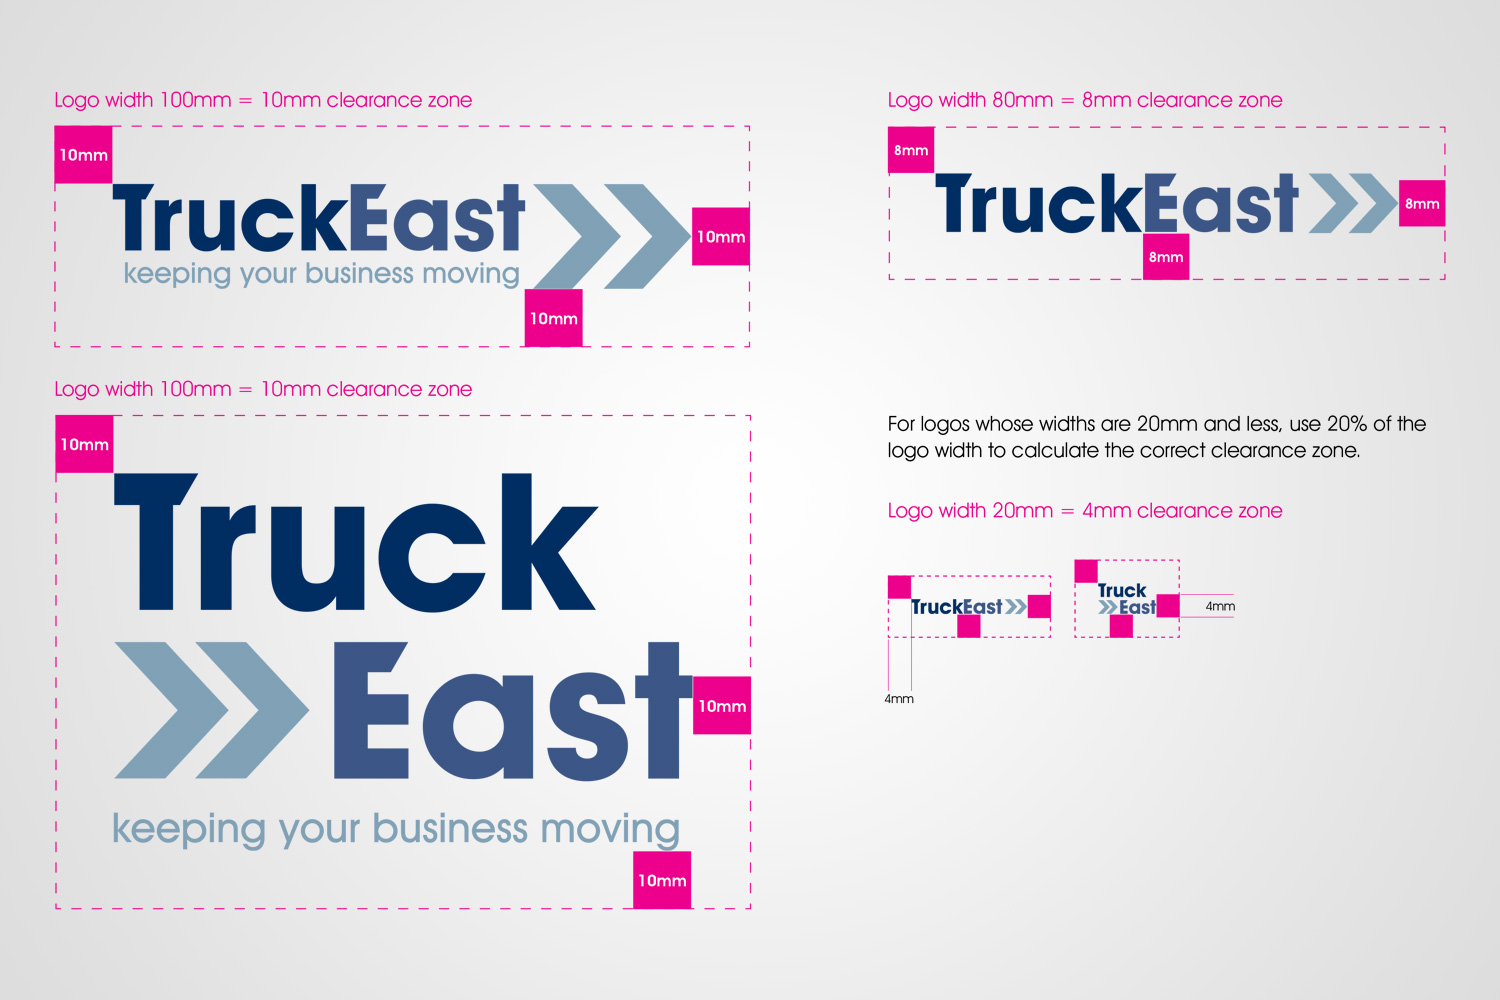 truckeast logo clearance brand guidelines